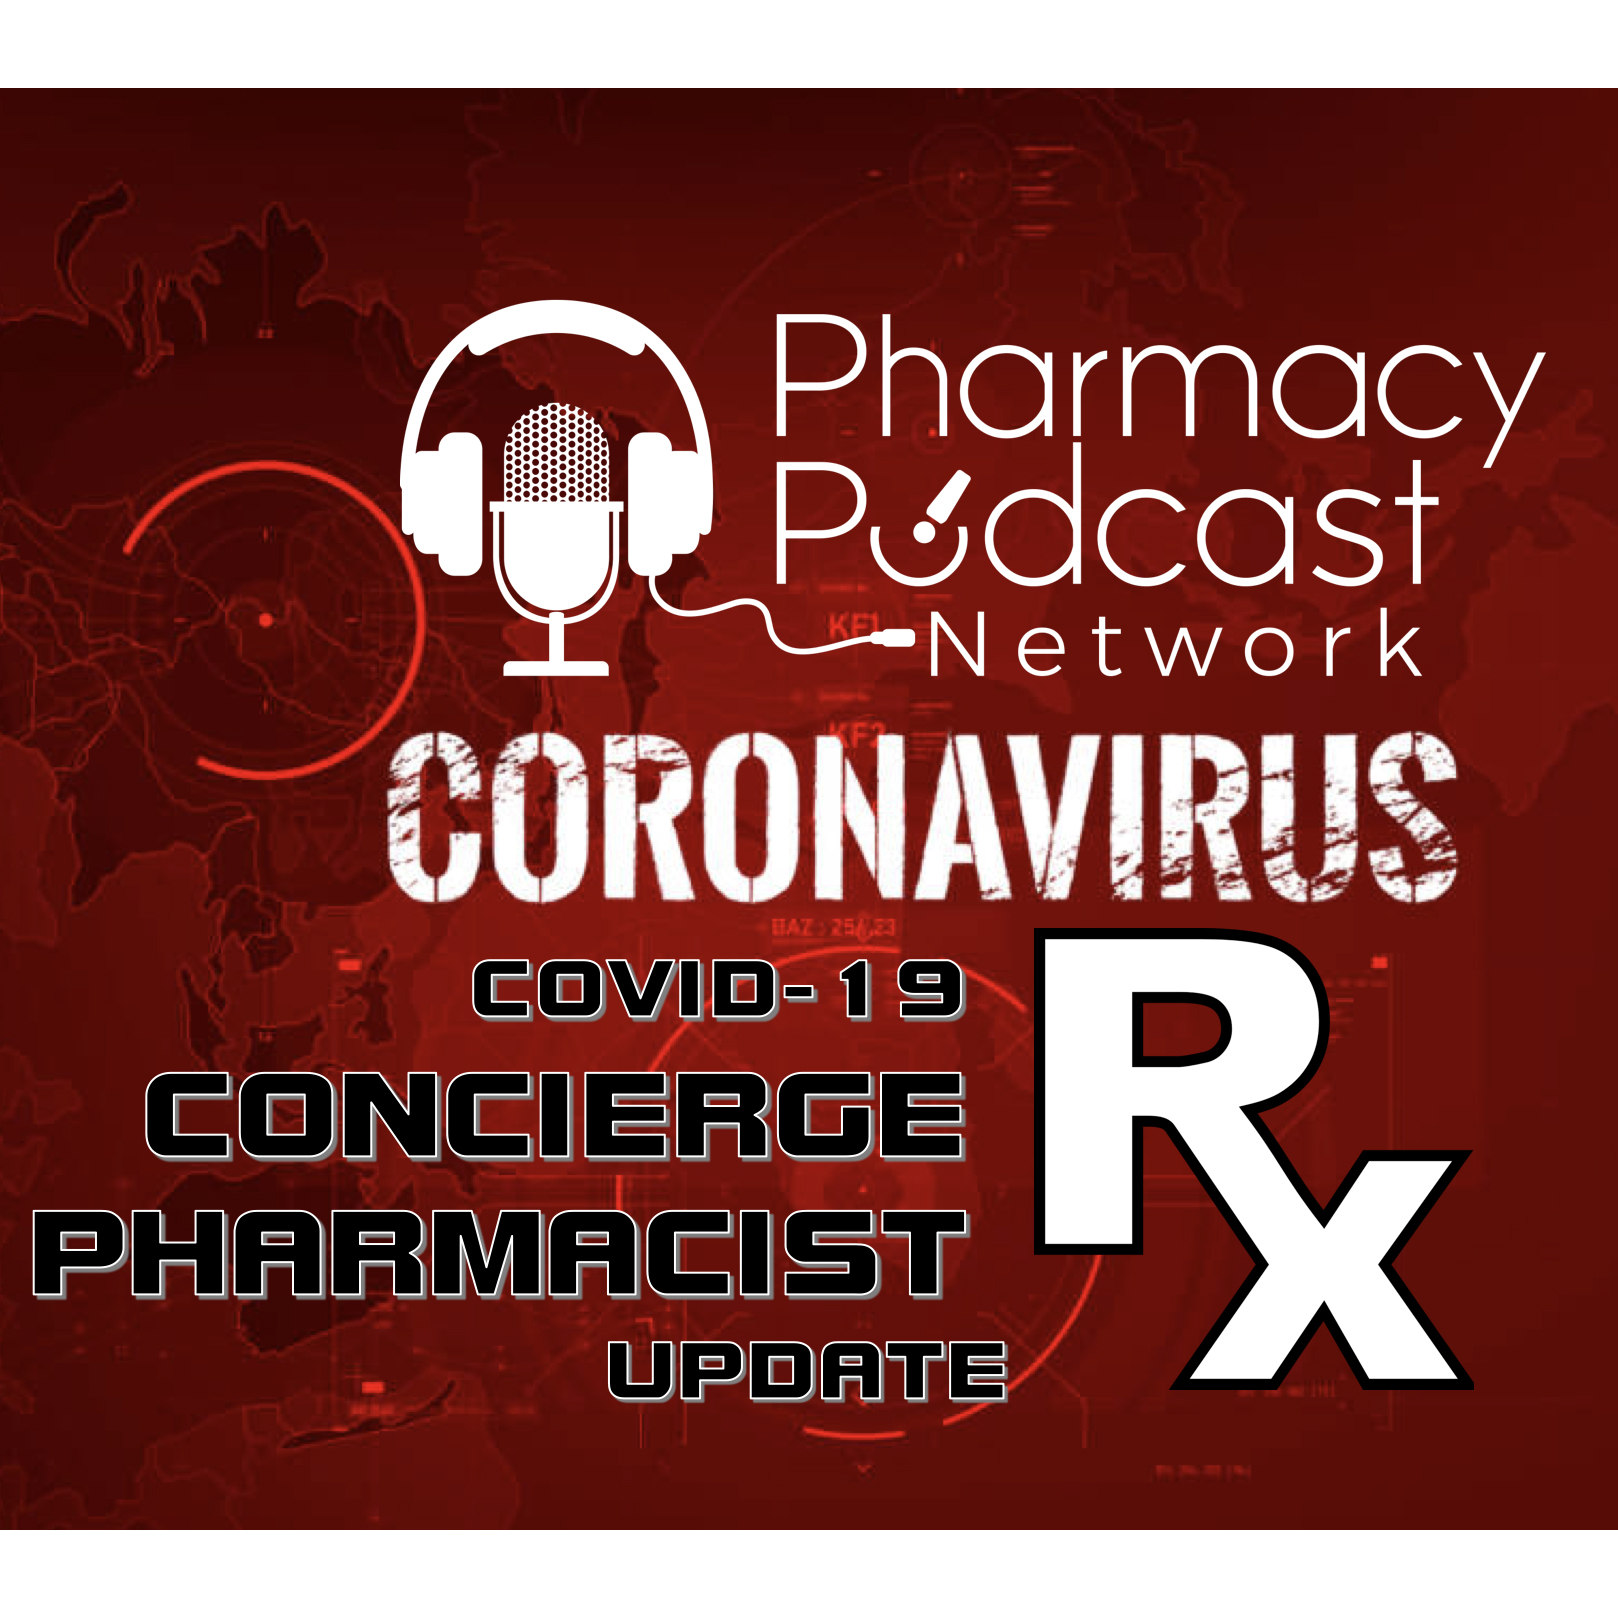 COVID-19 Concierge Pharmacist Update - PPN Episode 971